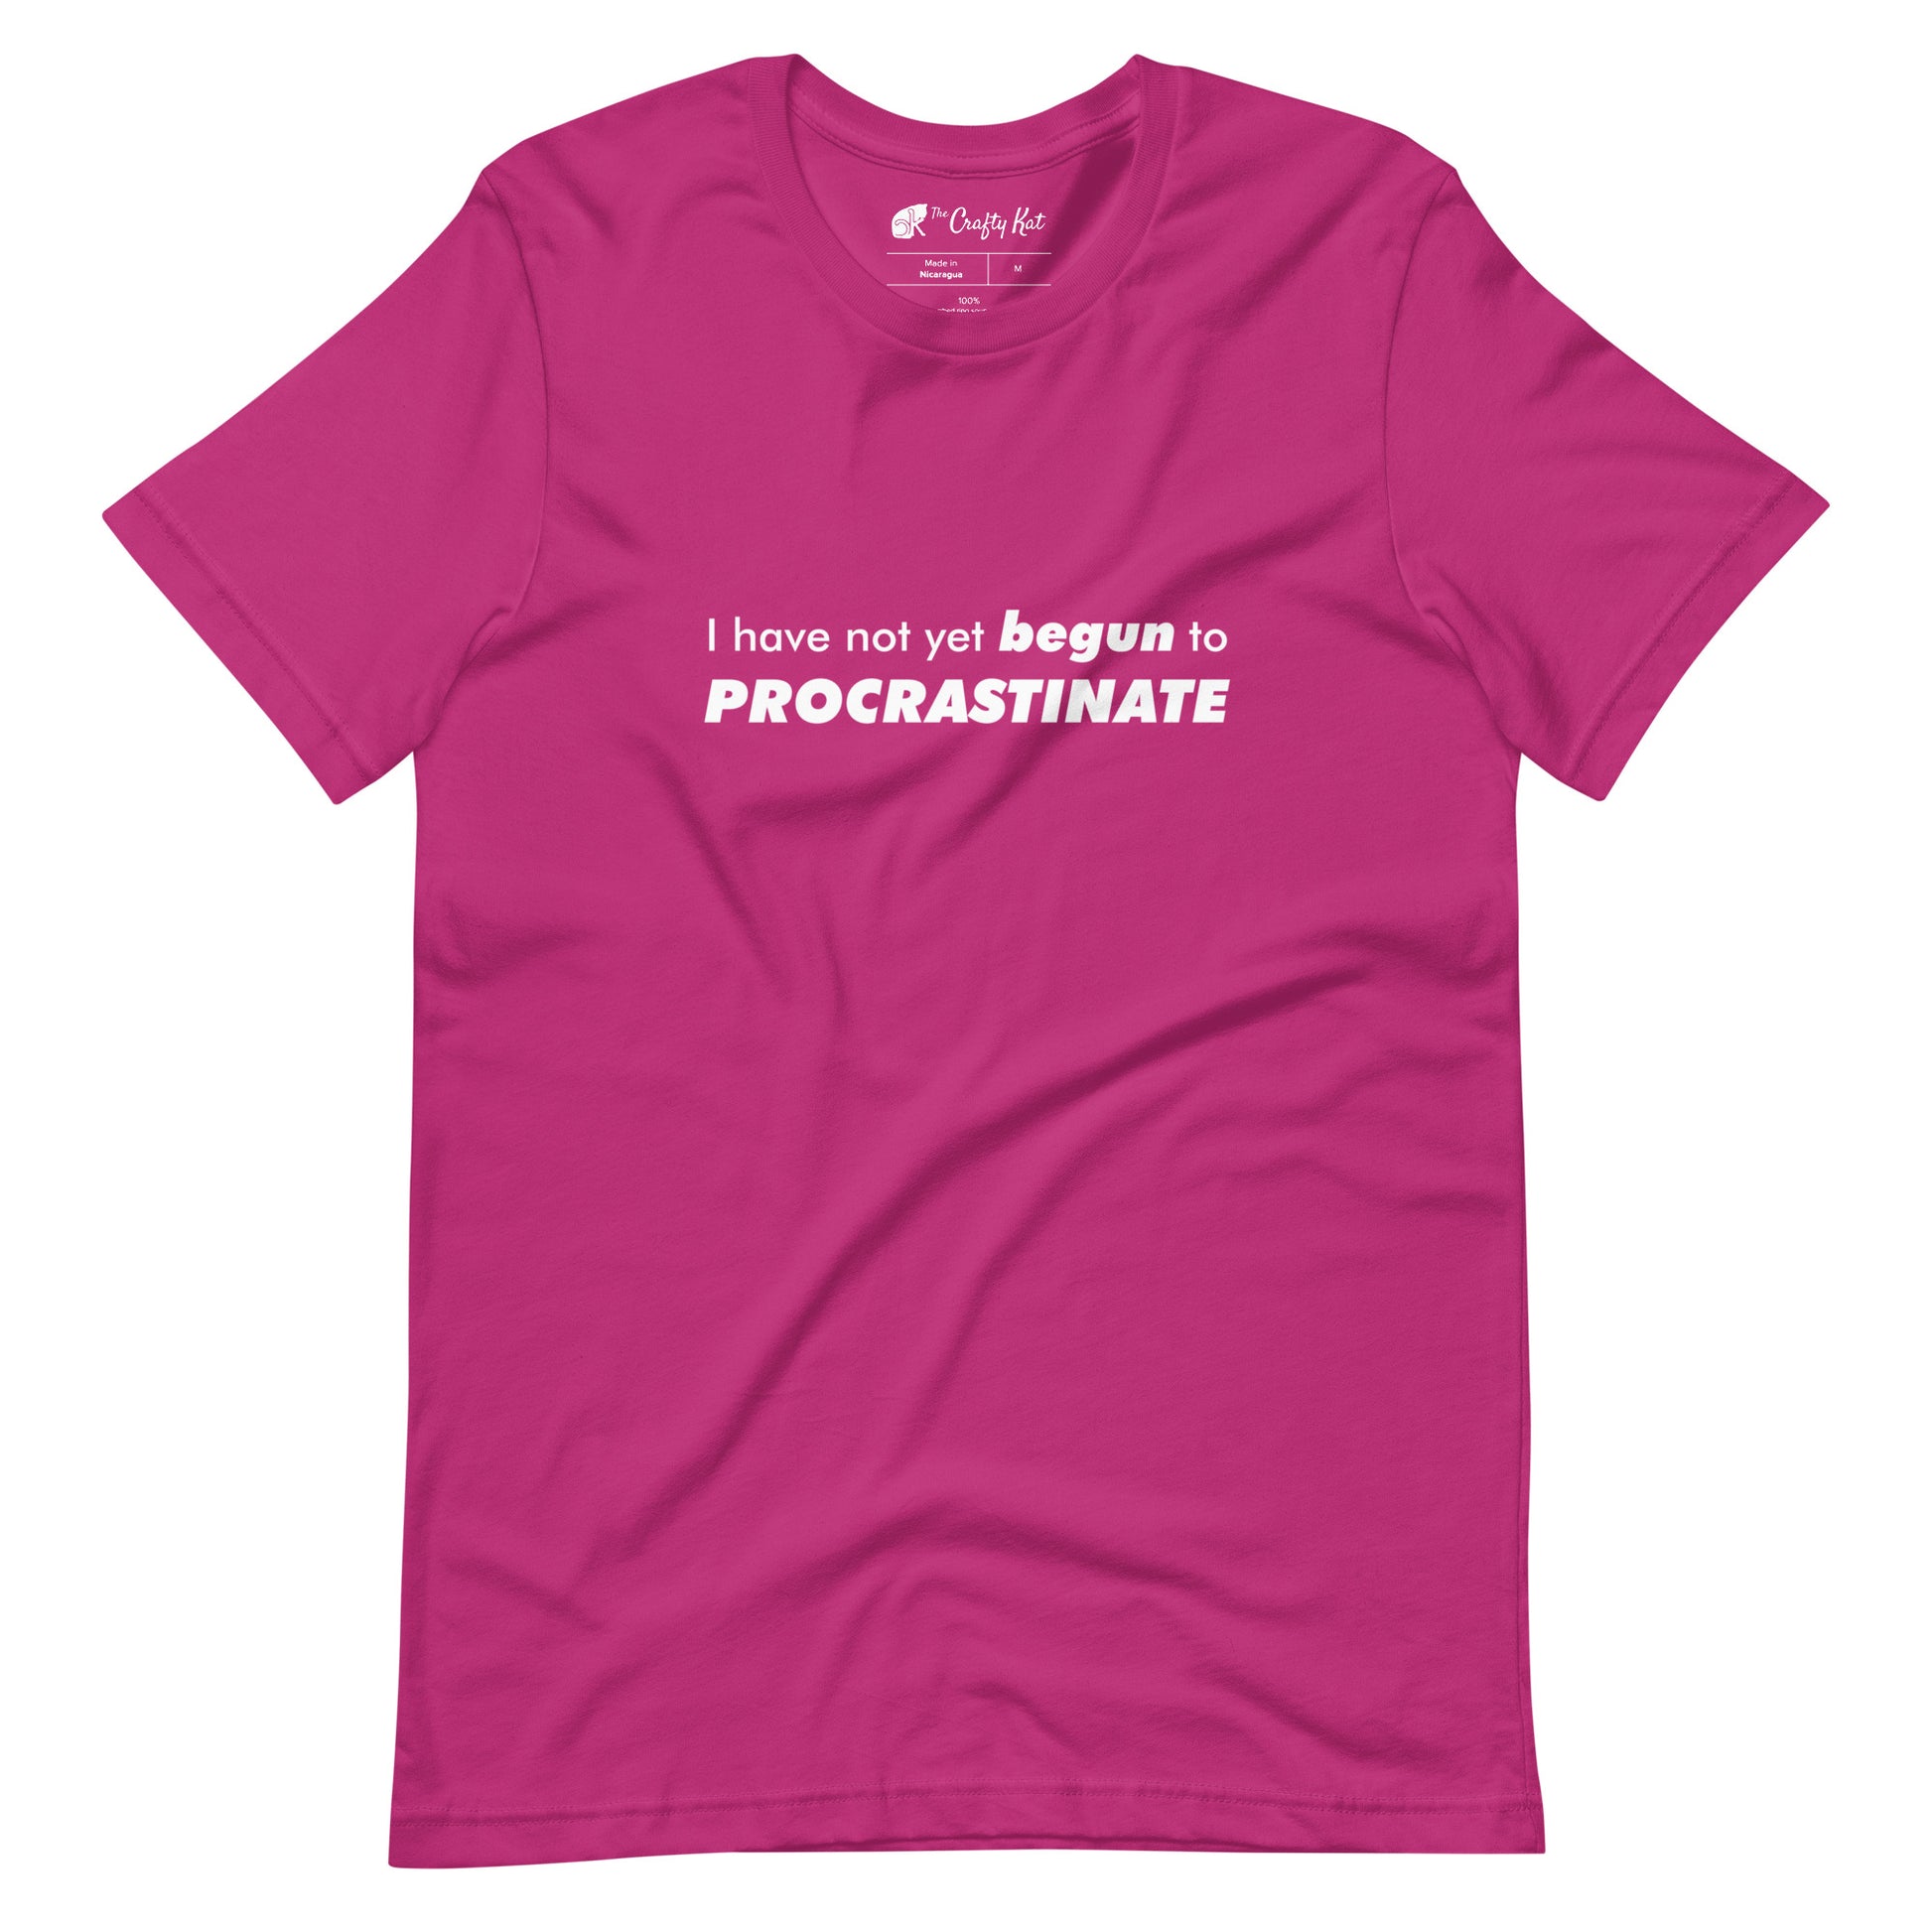 Berry (magenta) t-shirt with text graphic: "I have not yet BEGUN to PROCRASTINATE"